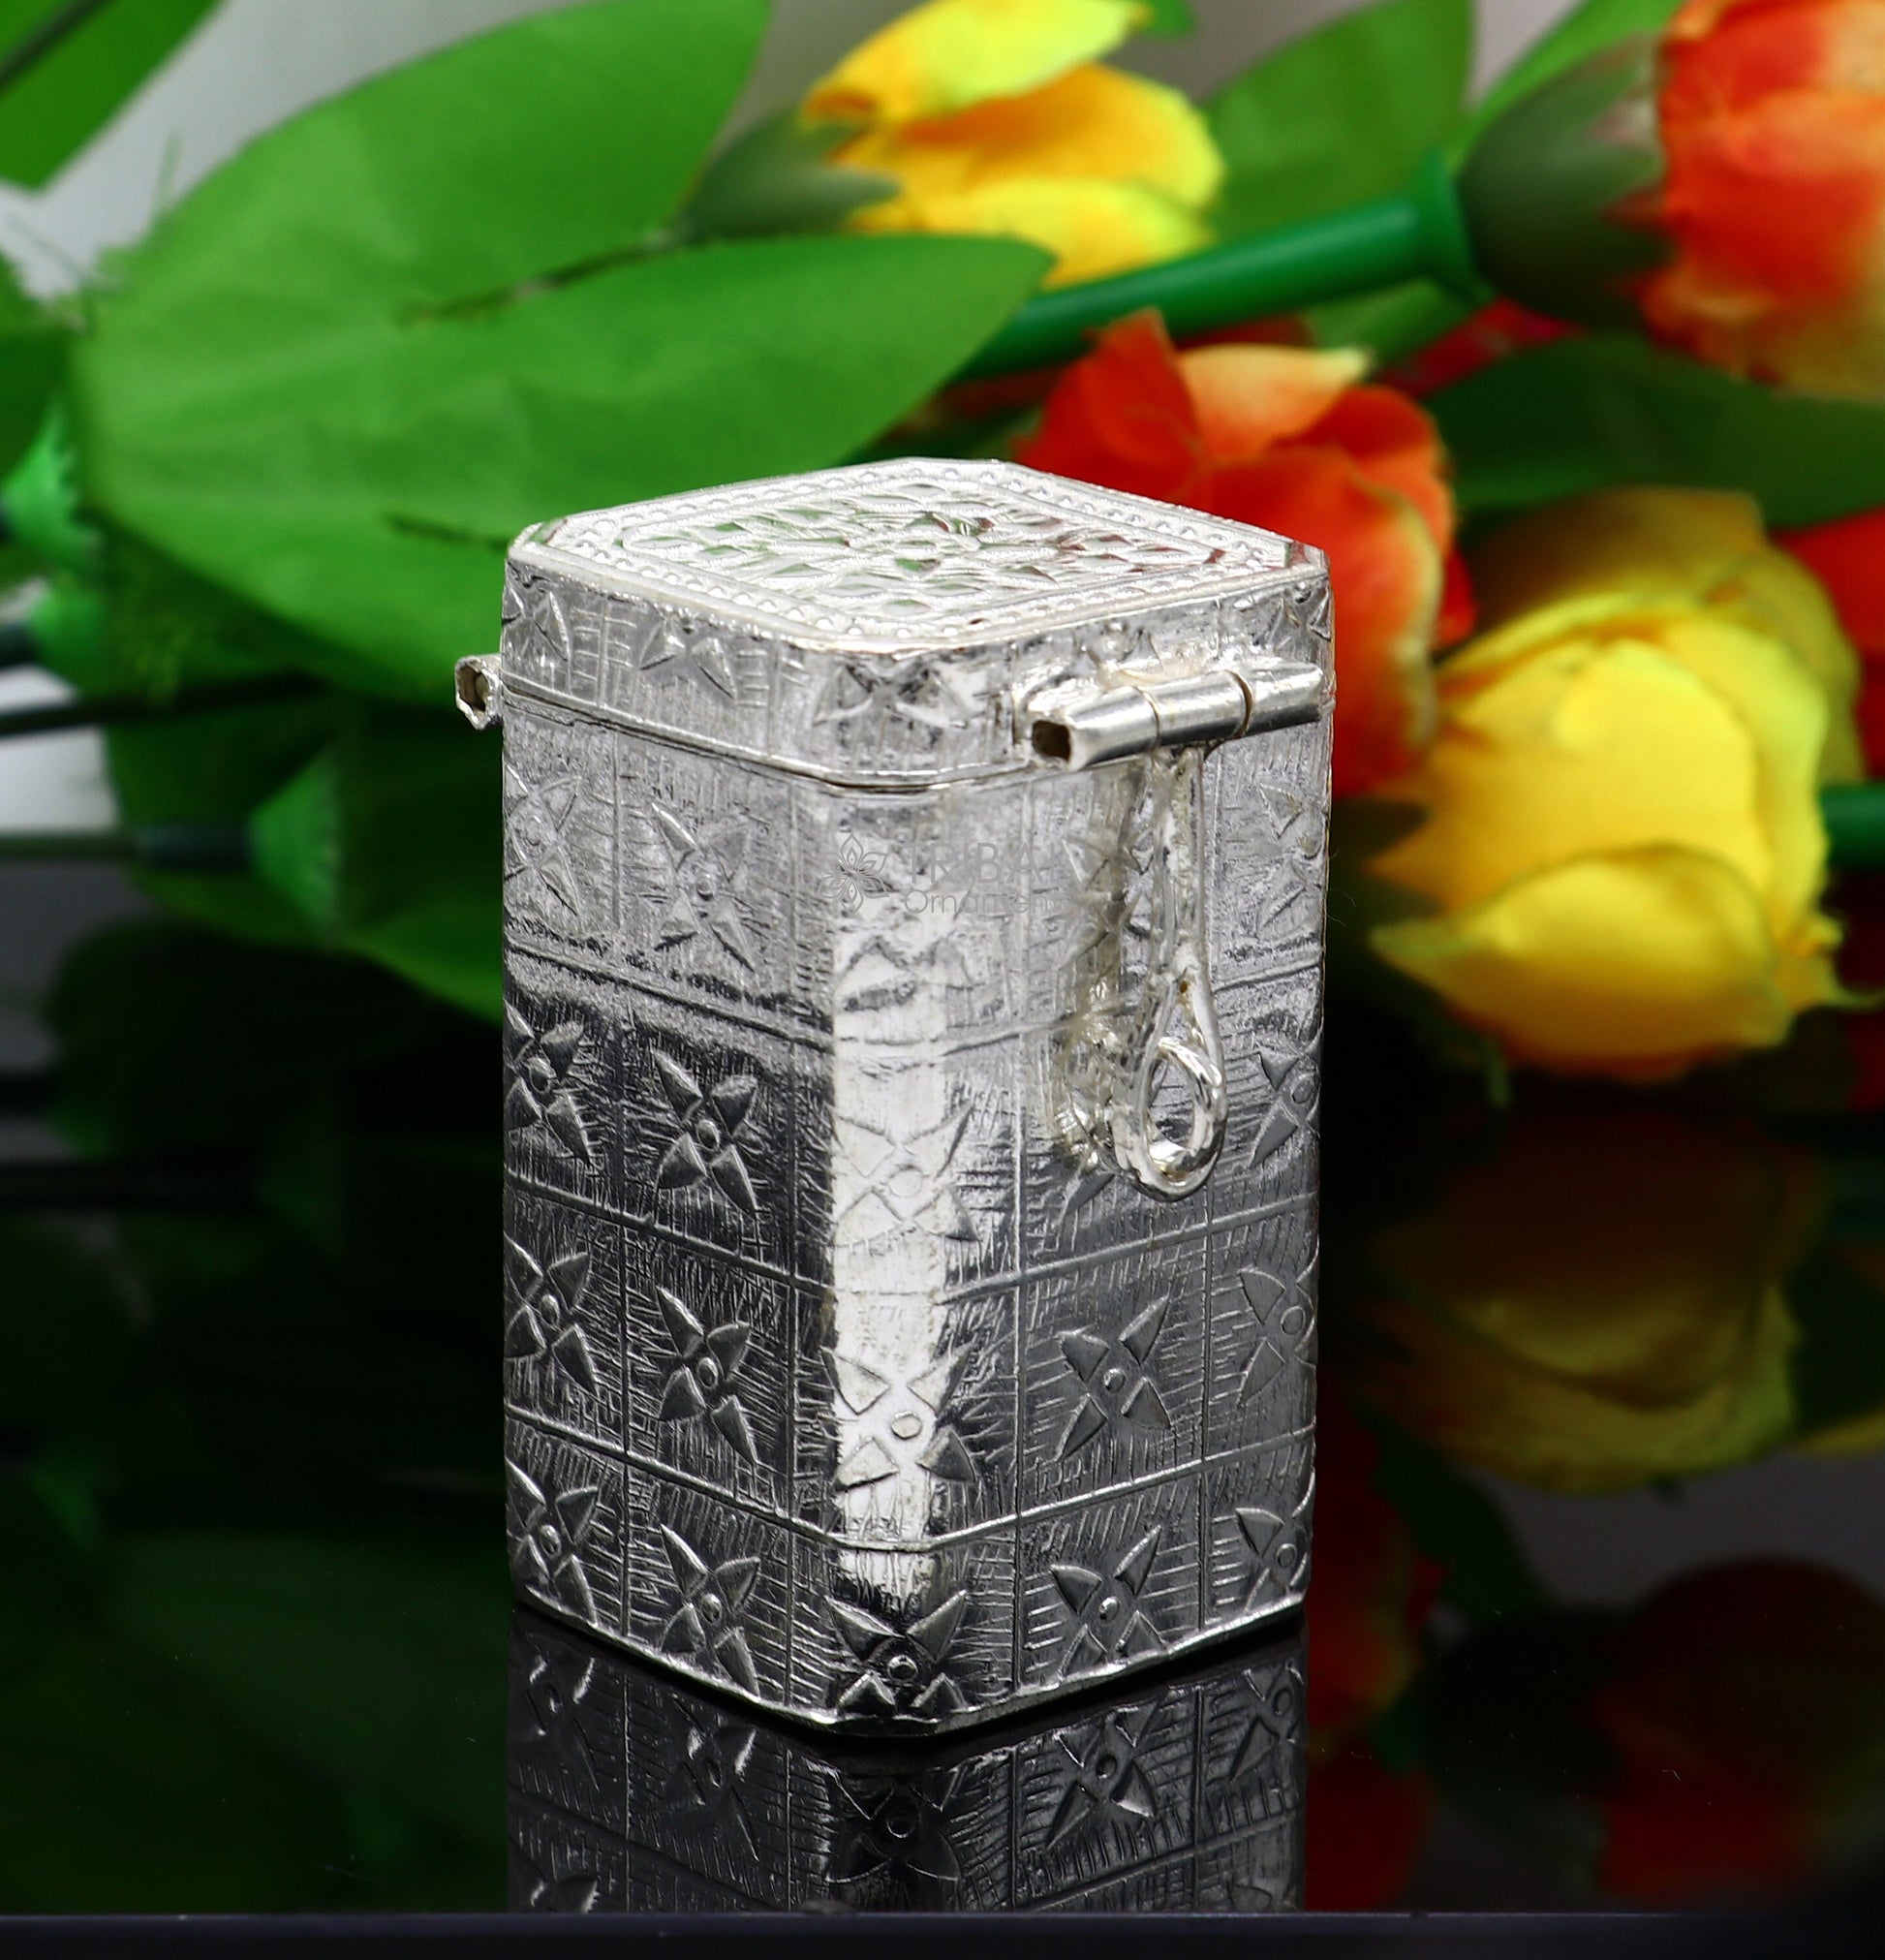 2.2" 925 silver utensils vintage style trinket box, container/casket box bridal floral work box, jewelry box silver utensils stb769 - TRIBAL ORNAMENTS